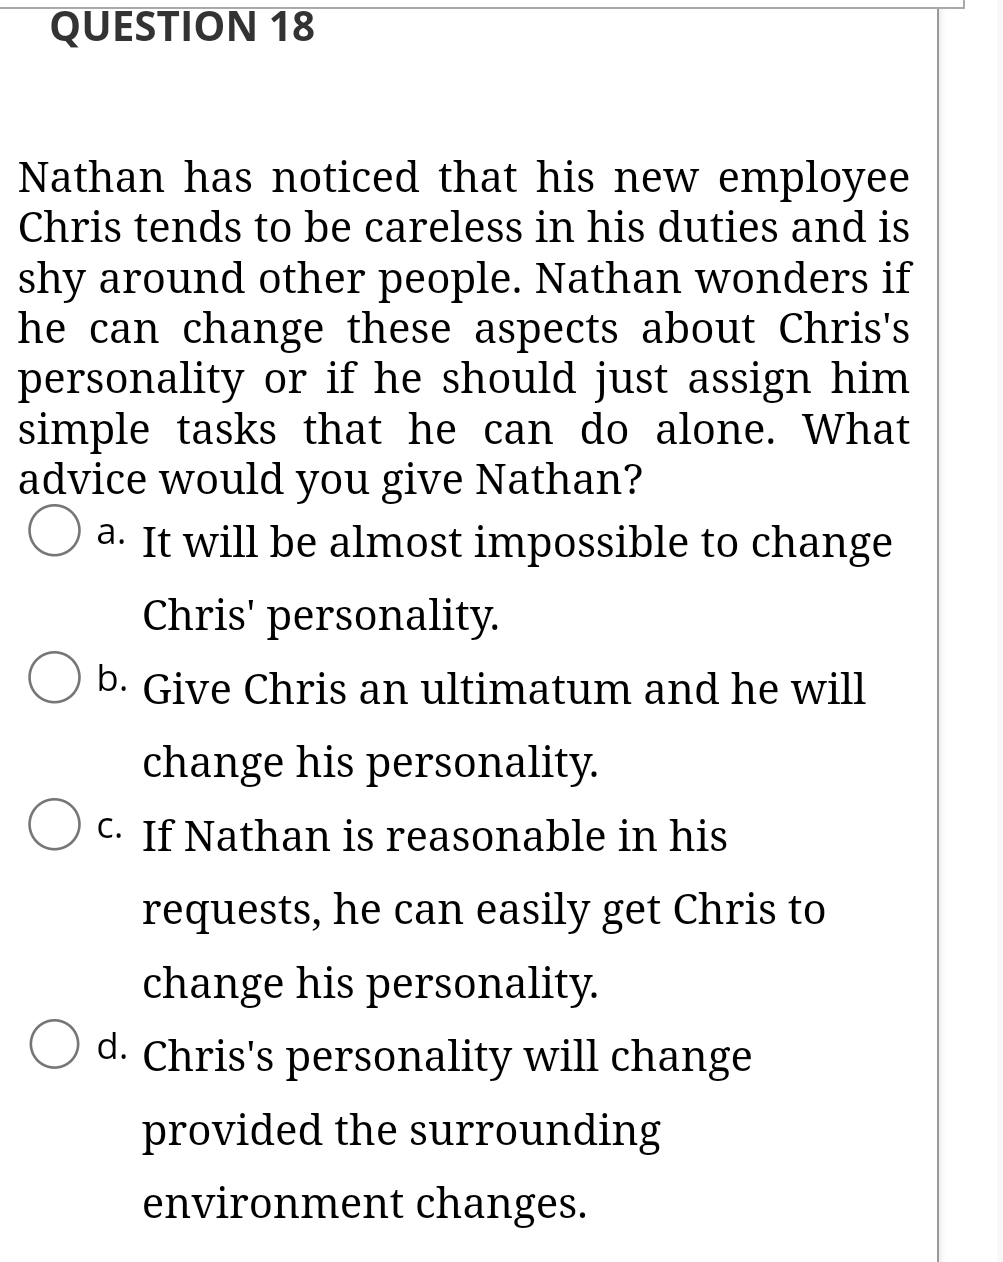 QUESTION 18
Nathan has noticed that his new employee
Chris tends to be careless in his duties and is
shy around other people. Nathan wonders if
he can change these aspects about Chris's
personality or if he should just assign him
simple tasks that he can do alone. What
advice would you give Nathan?
a. It will be almost impossible to change
Chris' personality.
b. Give Chris an ultimatum and he will
change his personality.
C. If Nathan is reasonable in his
requests, he can easily get Chris to
change his personality.
d. Chris's personality will change
provided the surrounding
environment changes.
